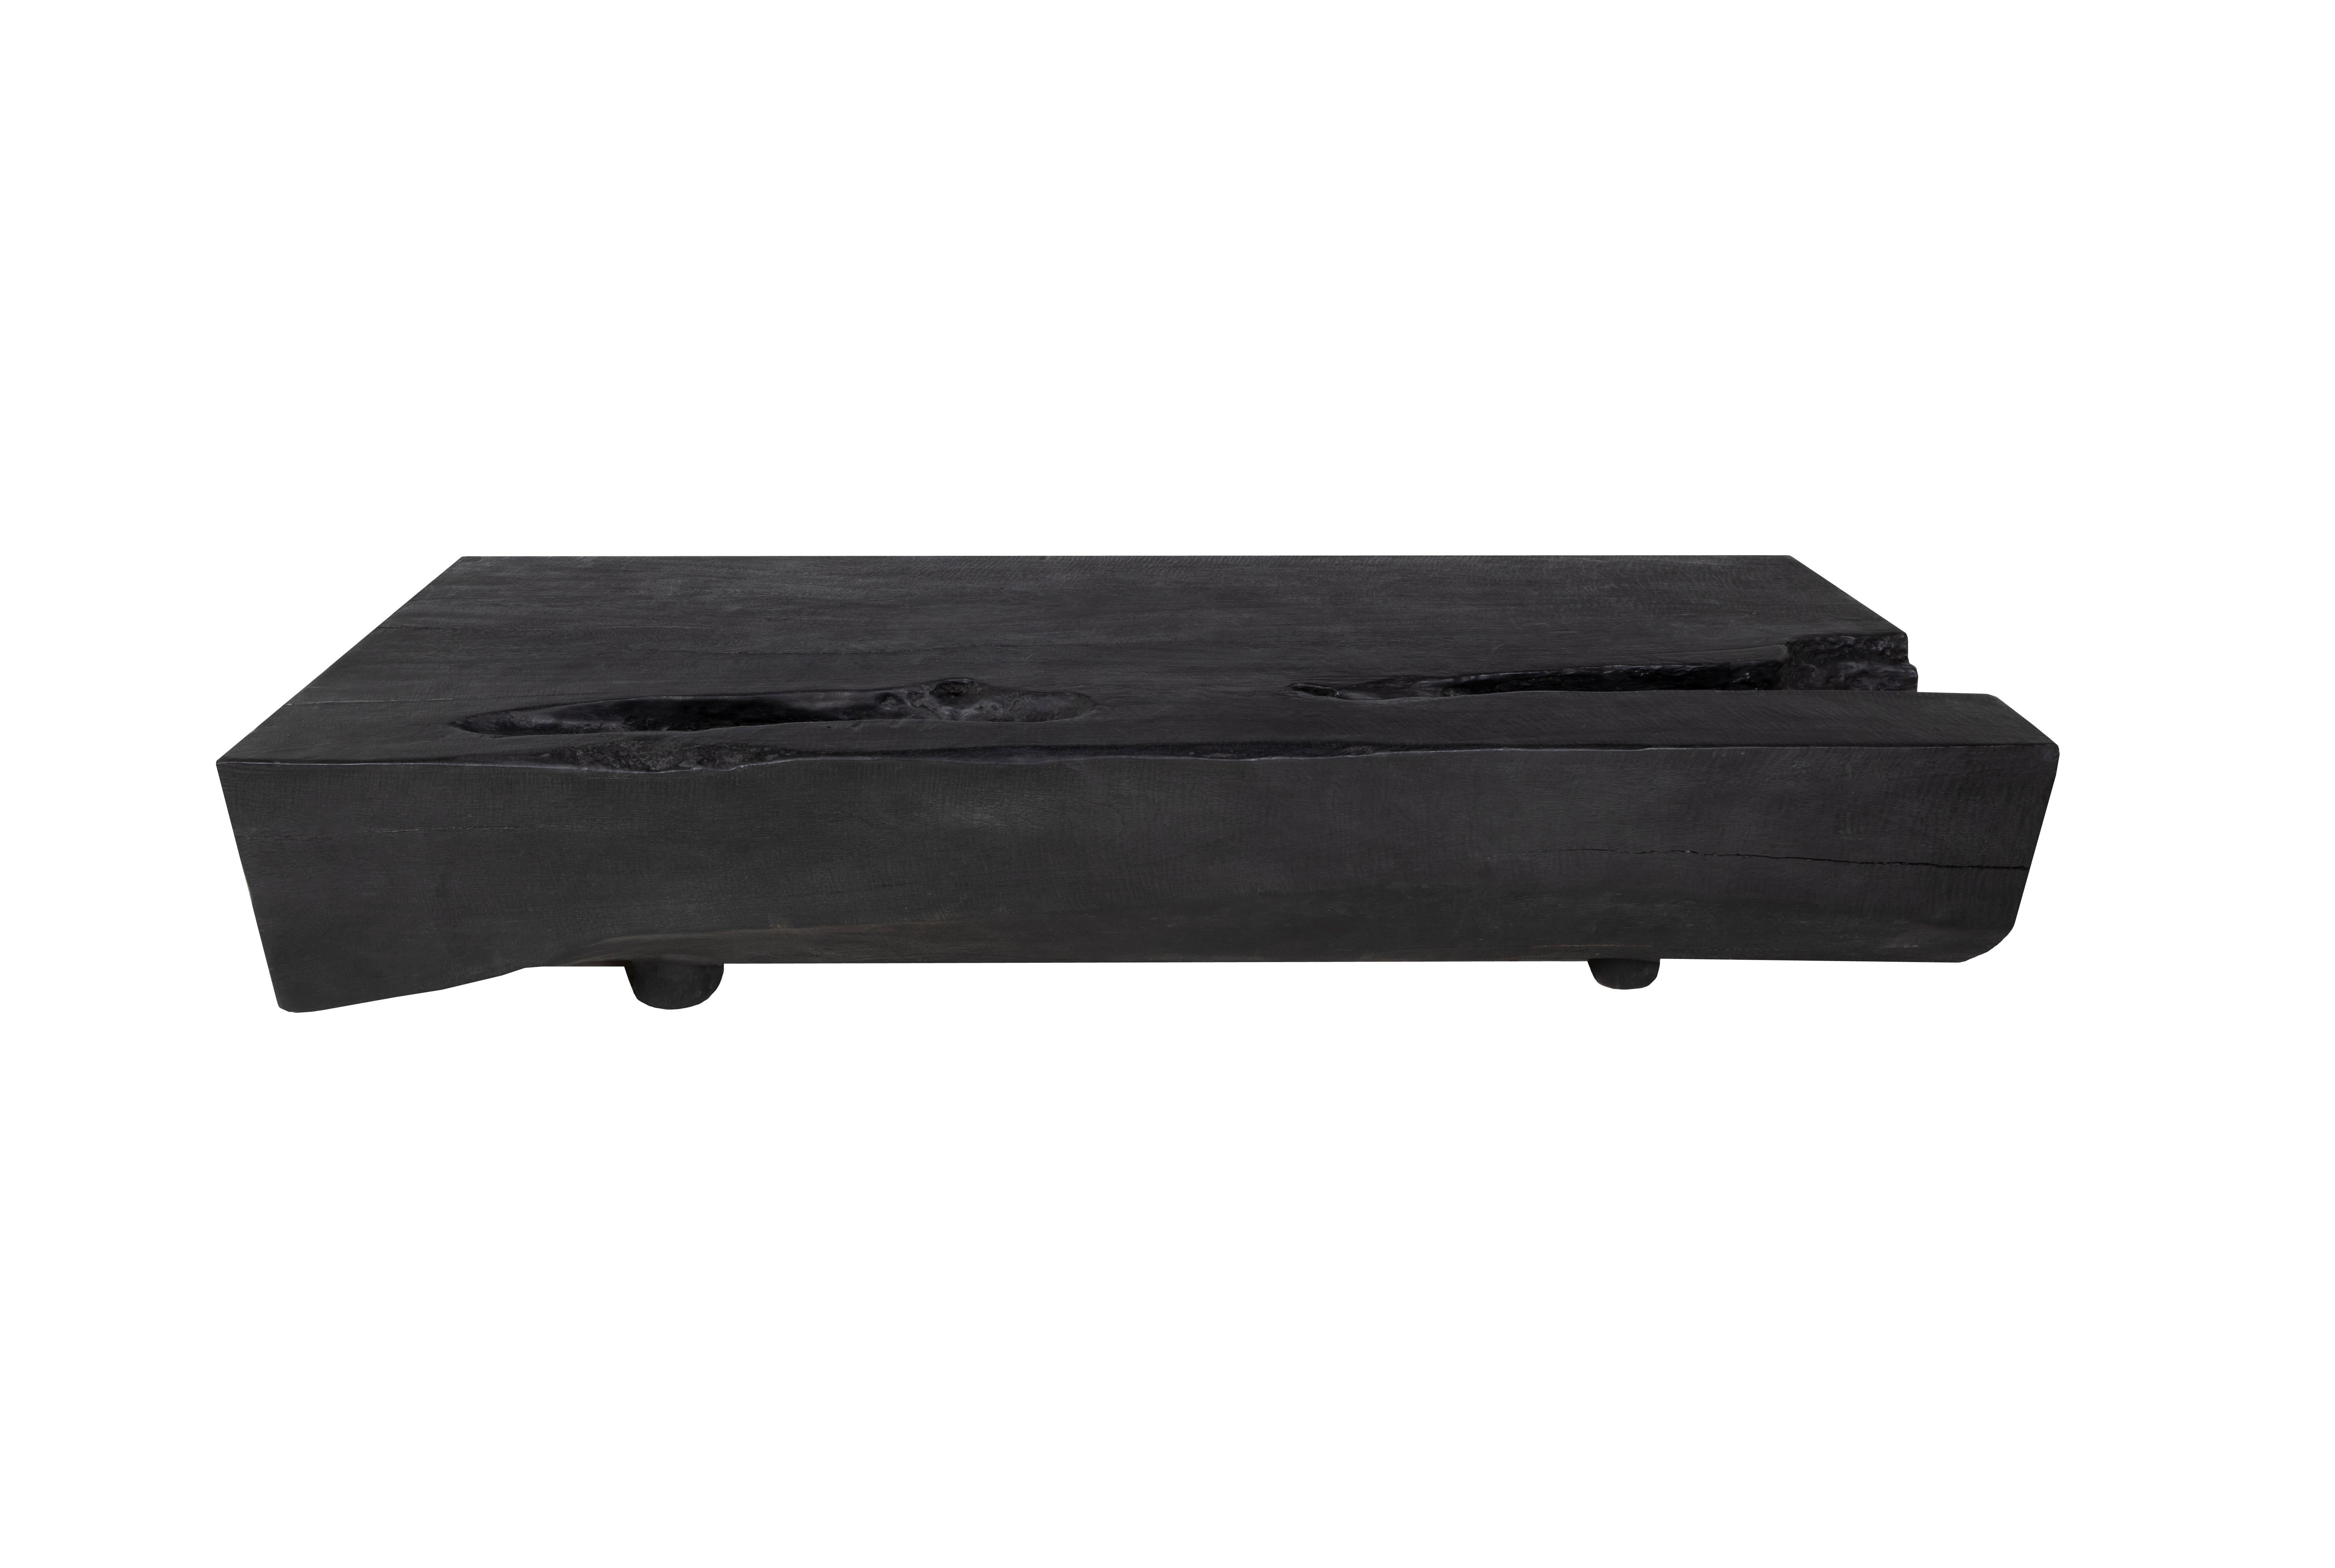 This monumental block coffee table is built from one single block of lychee hardwood. The top is flattened, sanded, and stained black to compliment the wood's naturally rich texture and rustic patterns. The sides are kept in their natural organic